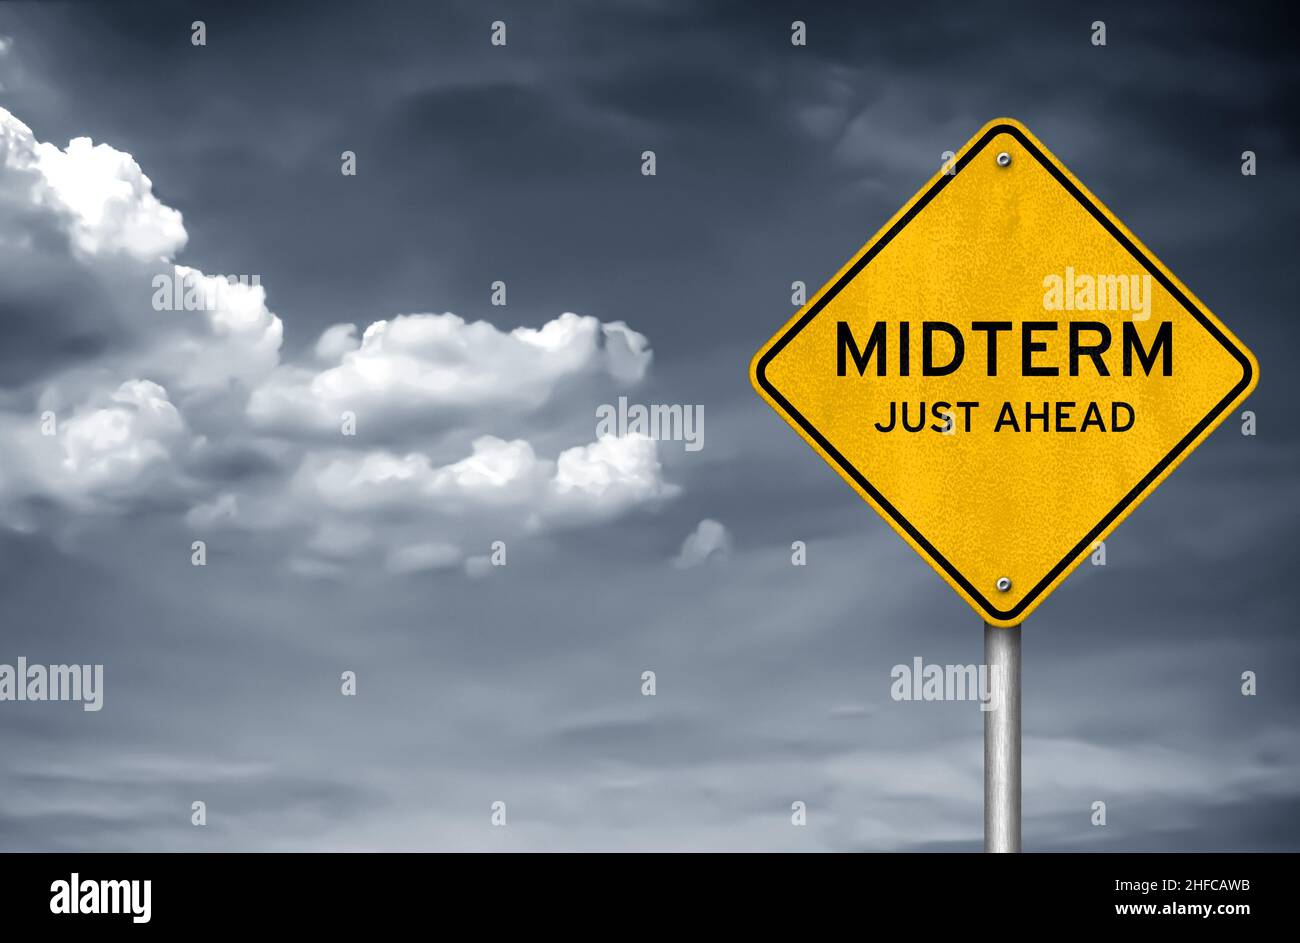 Midterm just ahead - information road sign Stock Photo